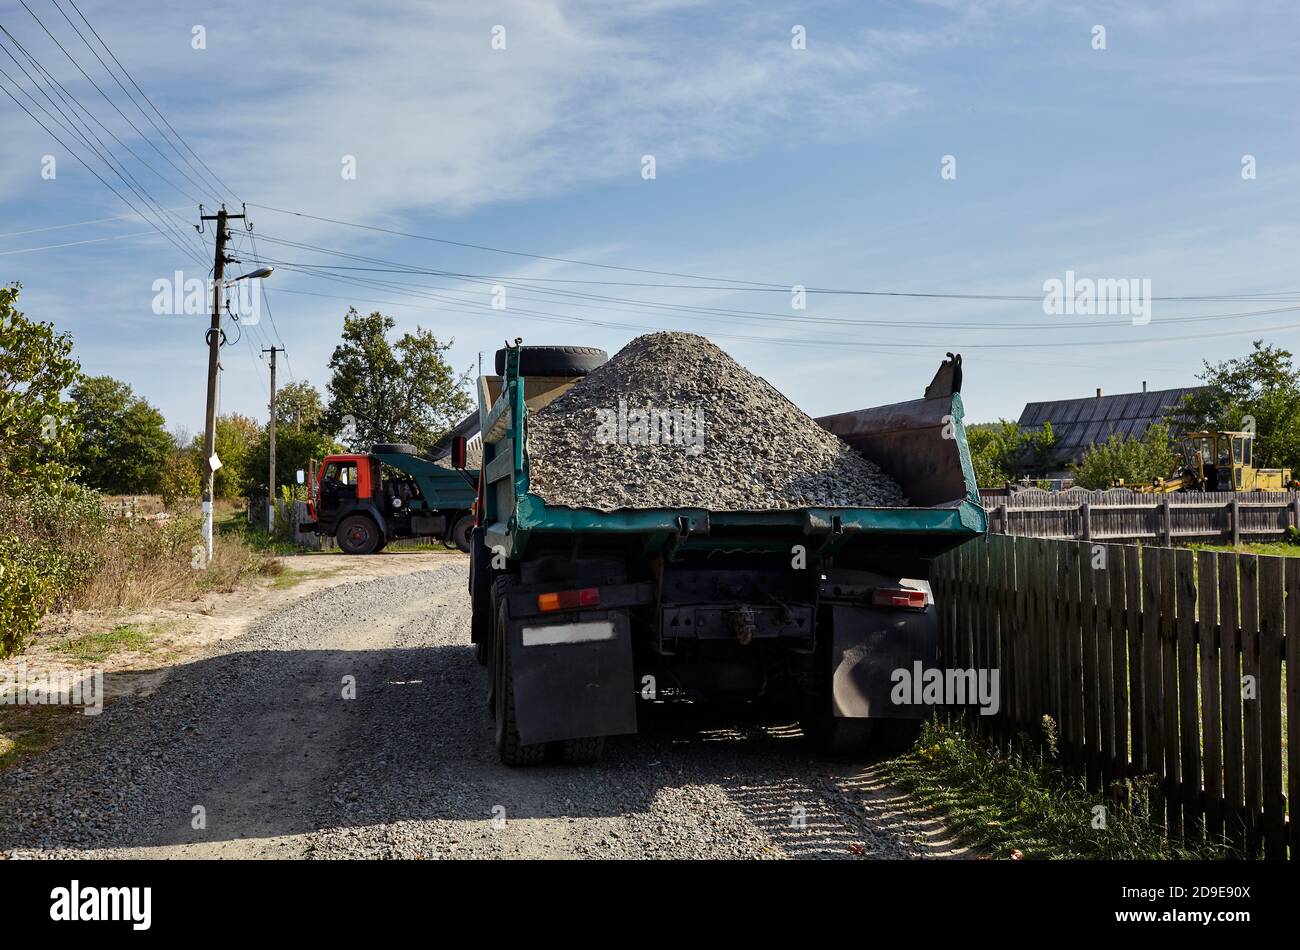 Big dump truck on suburban street, rear view. Waiting for dumping gravel for building and reconstruction roadway. Stock Photo